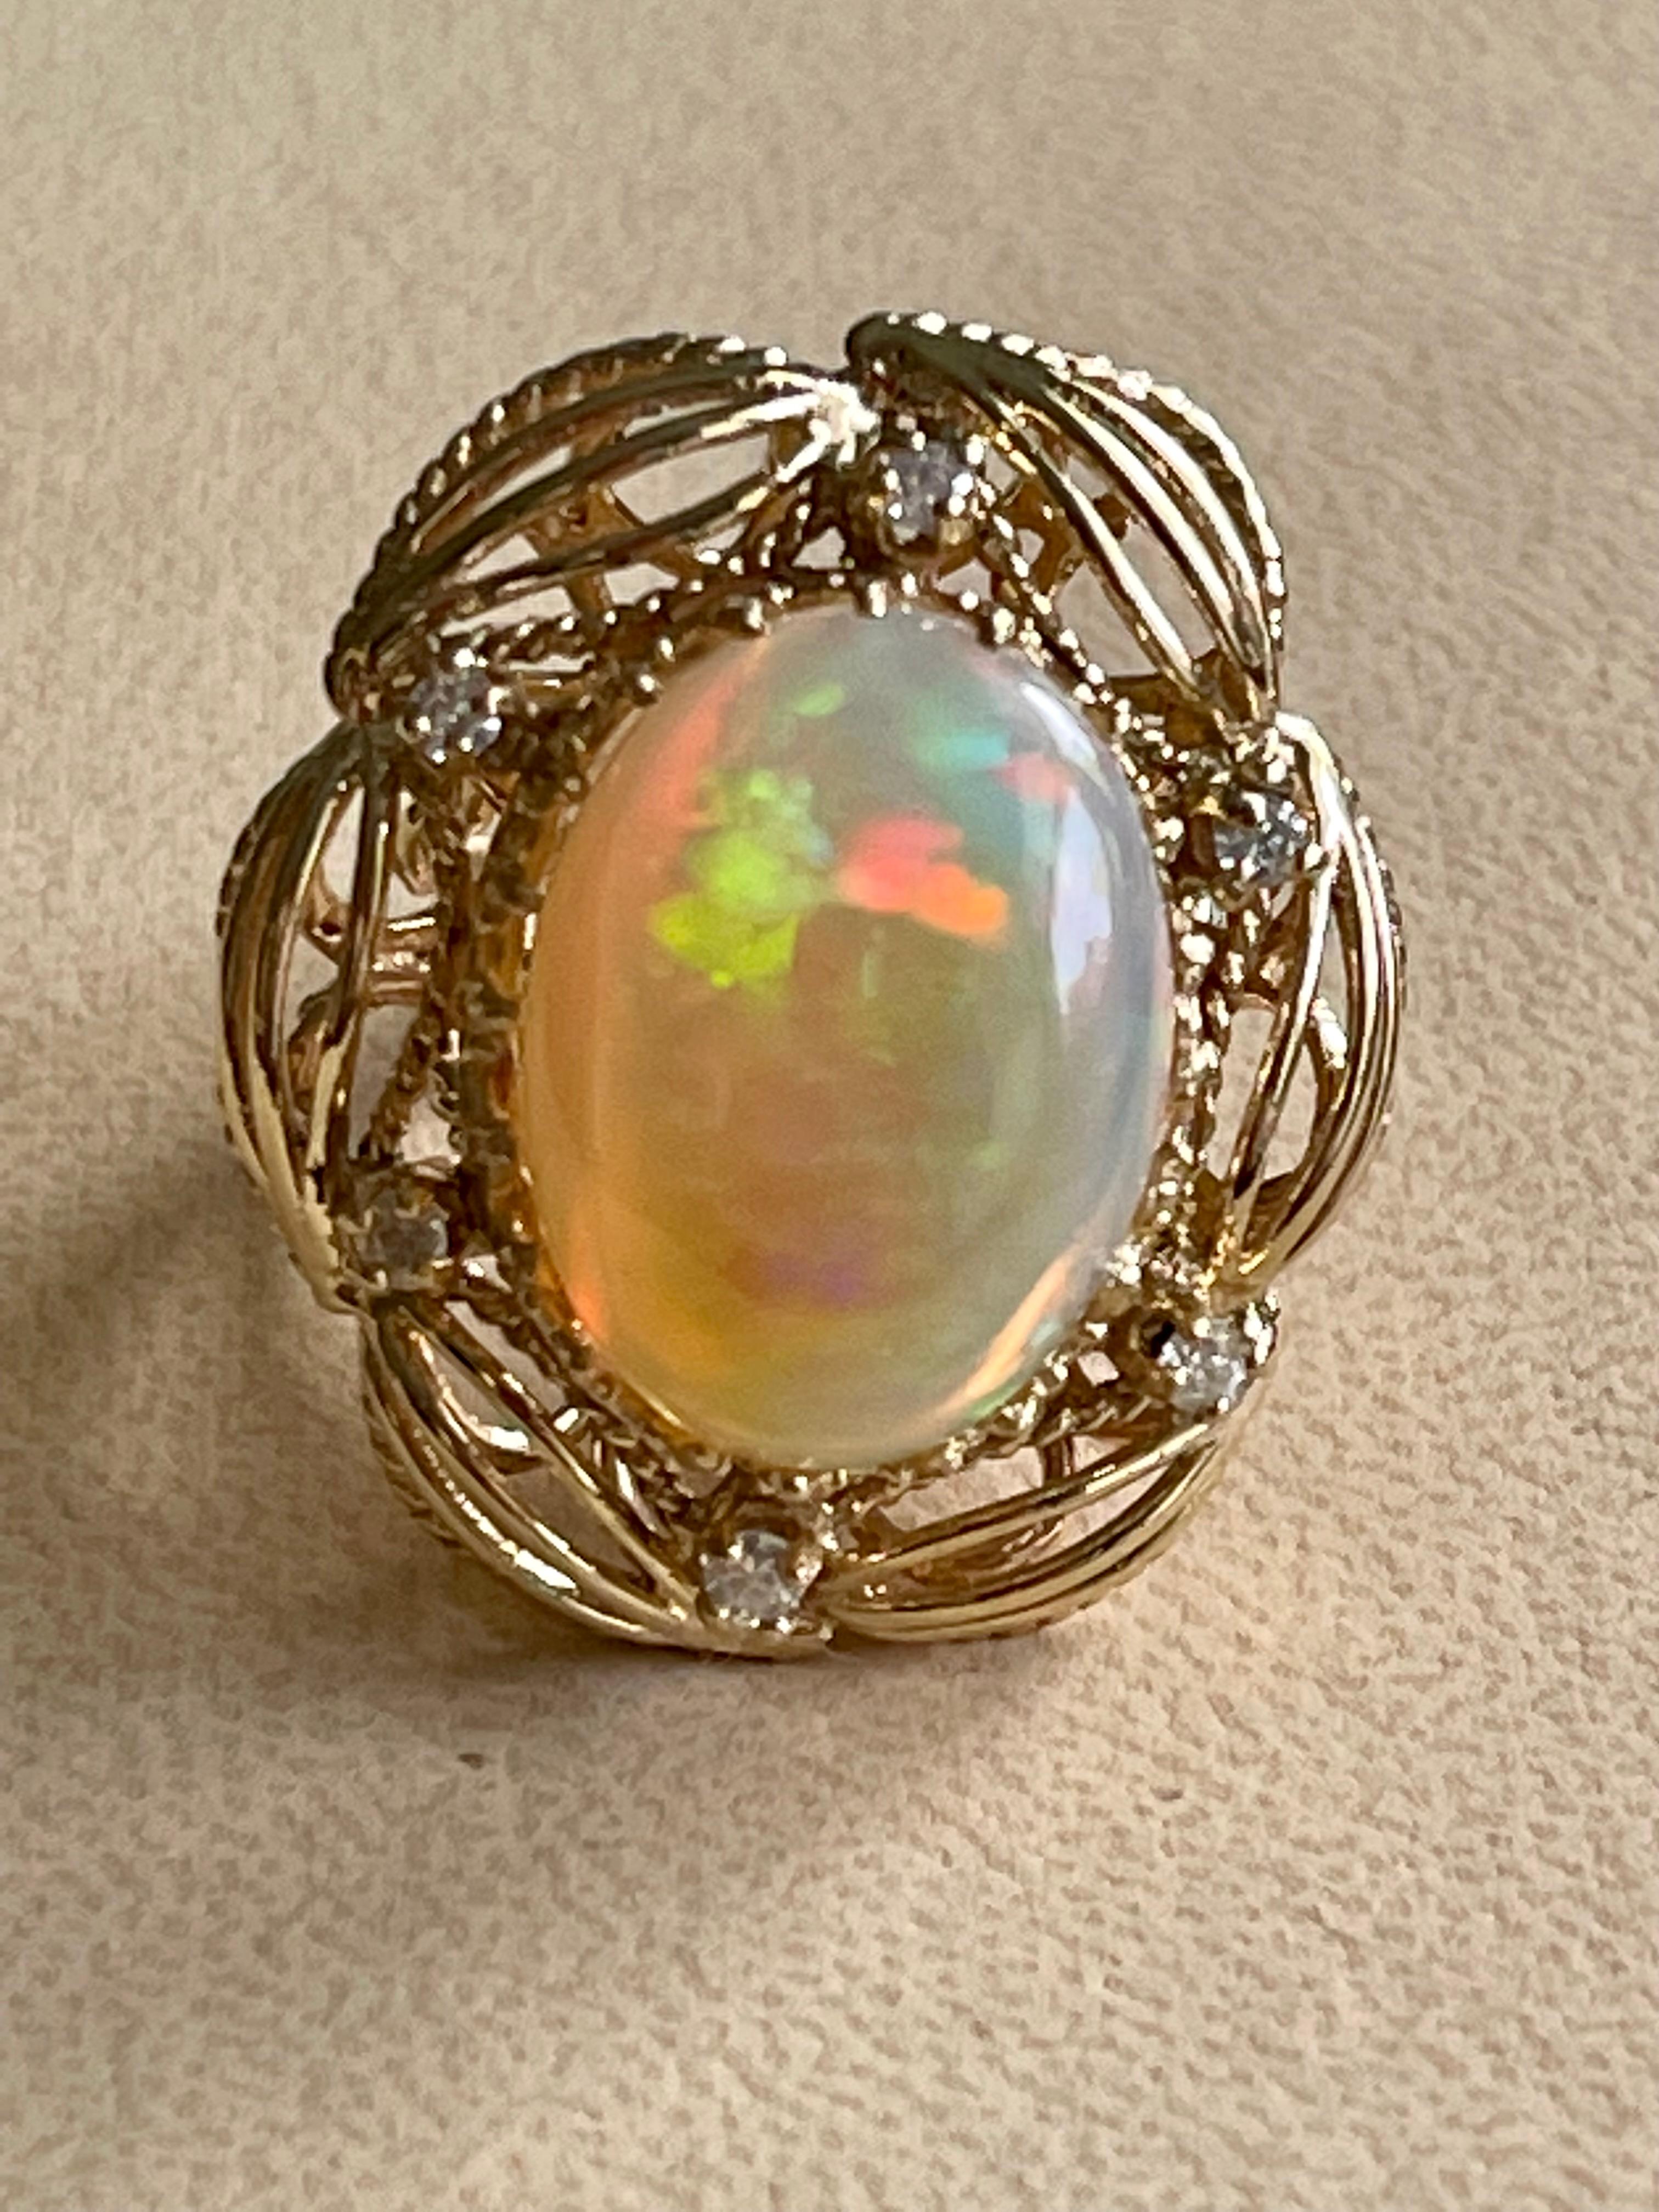 15 Carat Oval Shape Ethiopian Opal Cocktail Ring 14 Karat Yellow Gold Solid Ring For Sale